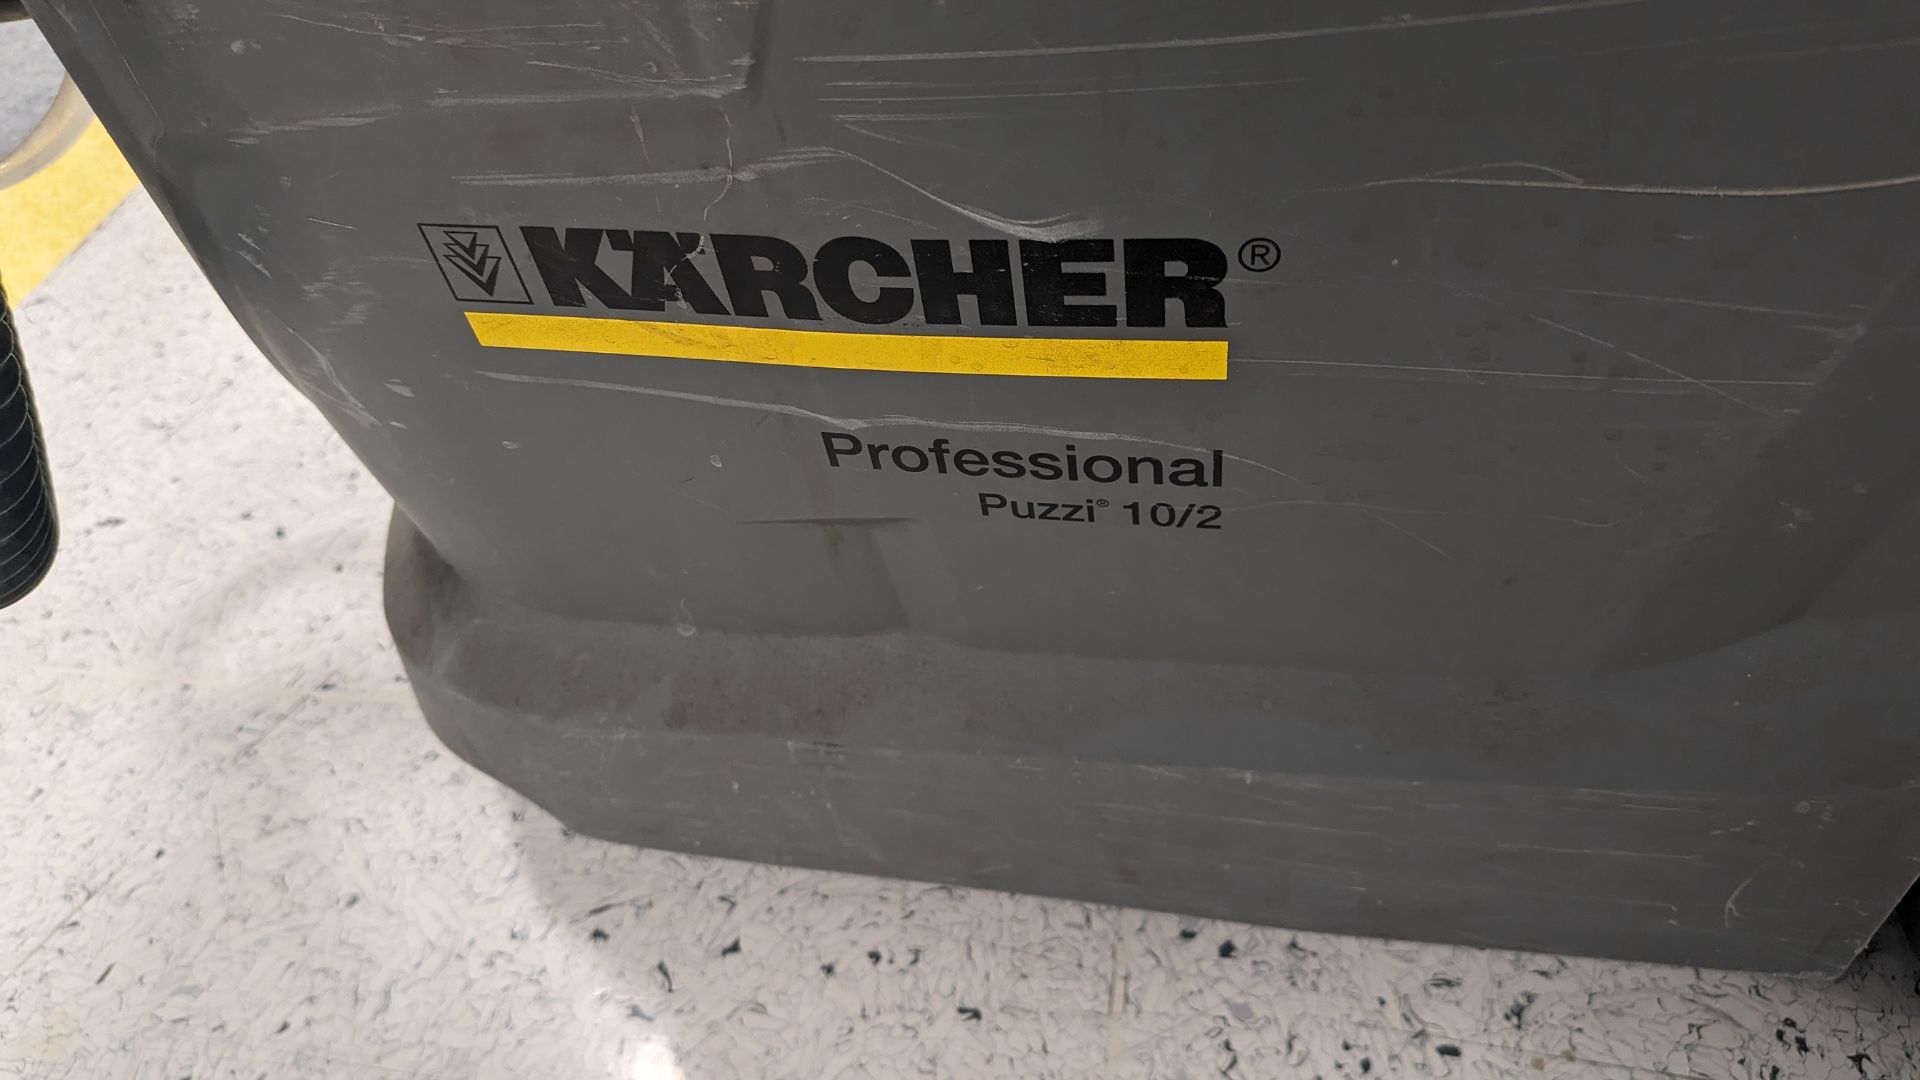 Karcher Professional Puzzi 10/2 spray-extraction cleaner - Image 2 of 2